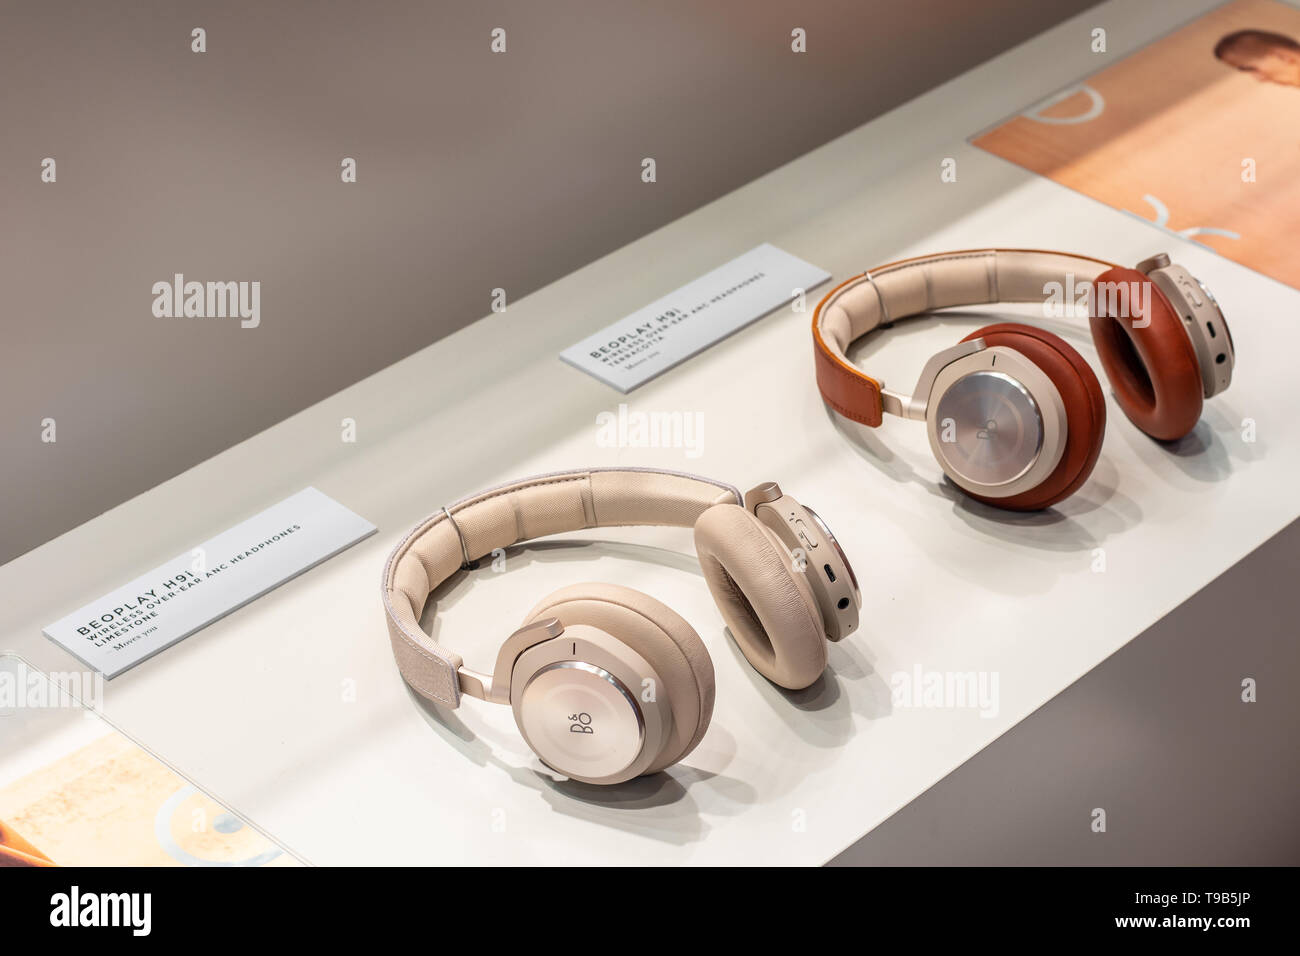 Berlin, Germany, August 30, 2018, Bang & Olufsen stereo headset Beoplay H4,  H8i, H9i Wireless over-ear Headphones at Bang & Olufsen B&O exhibition  Stock Photo - Alamy